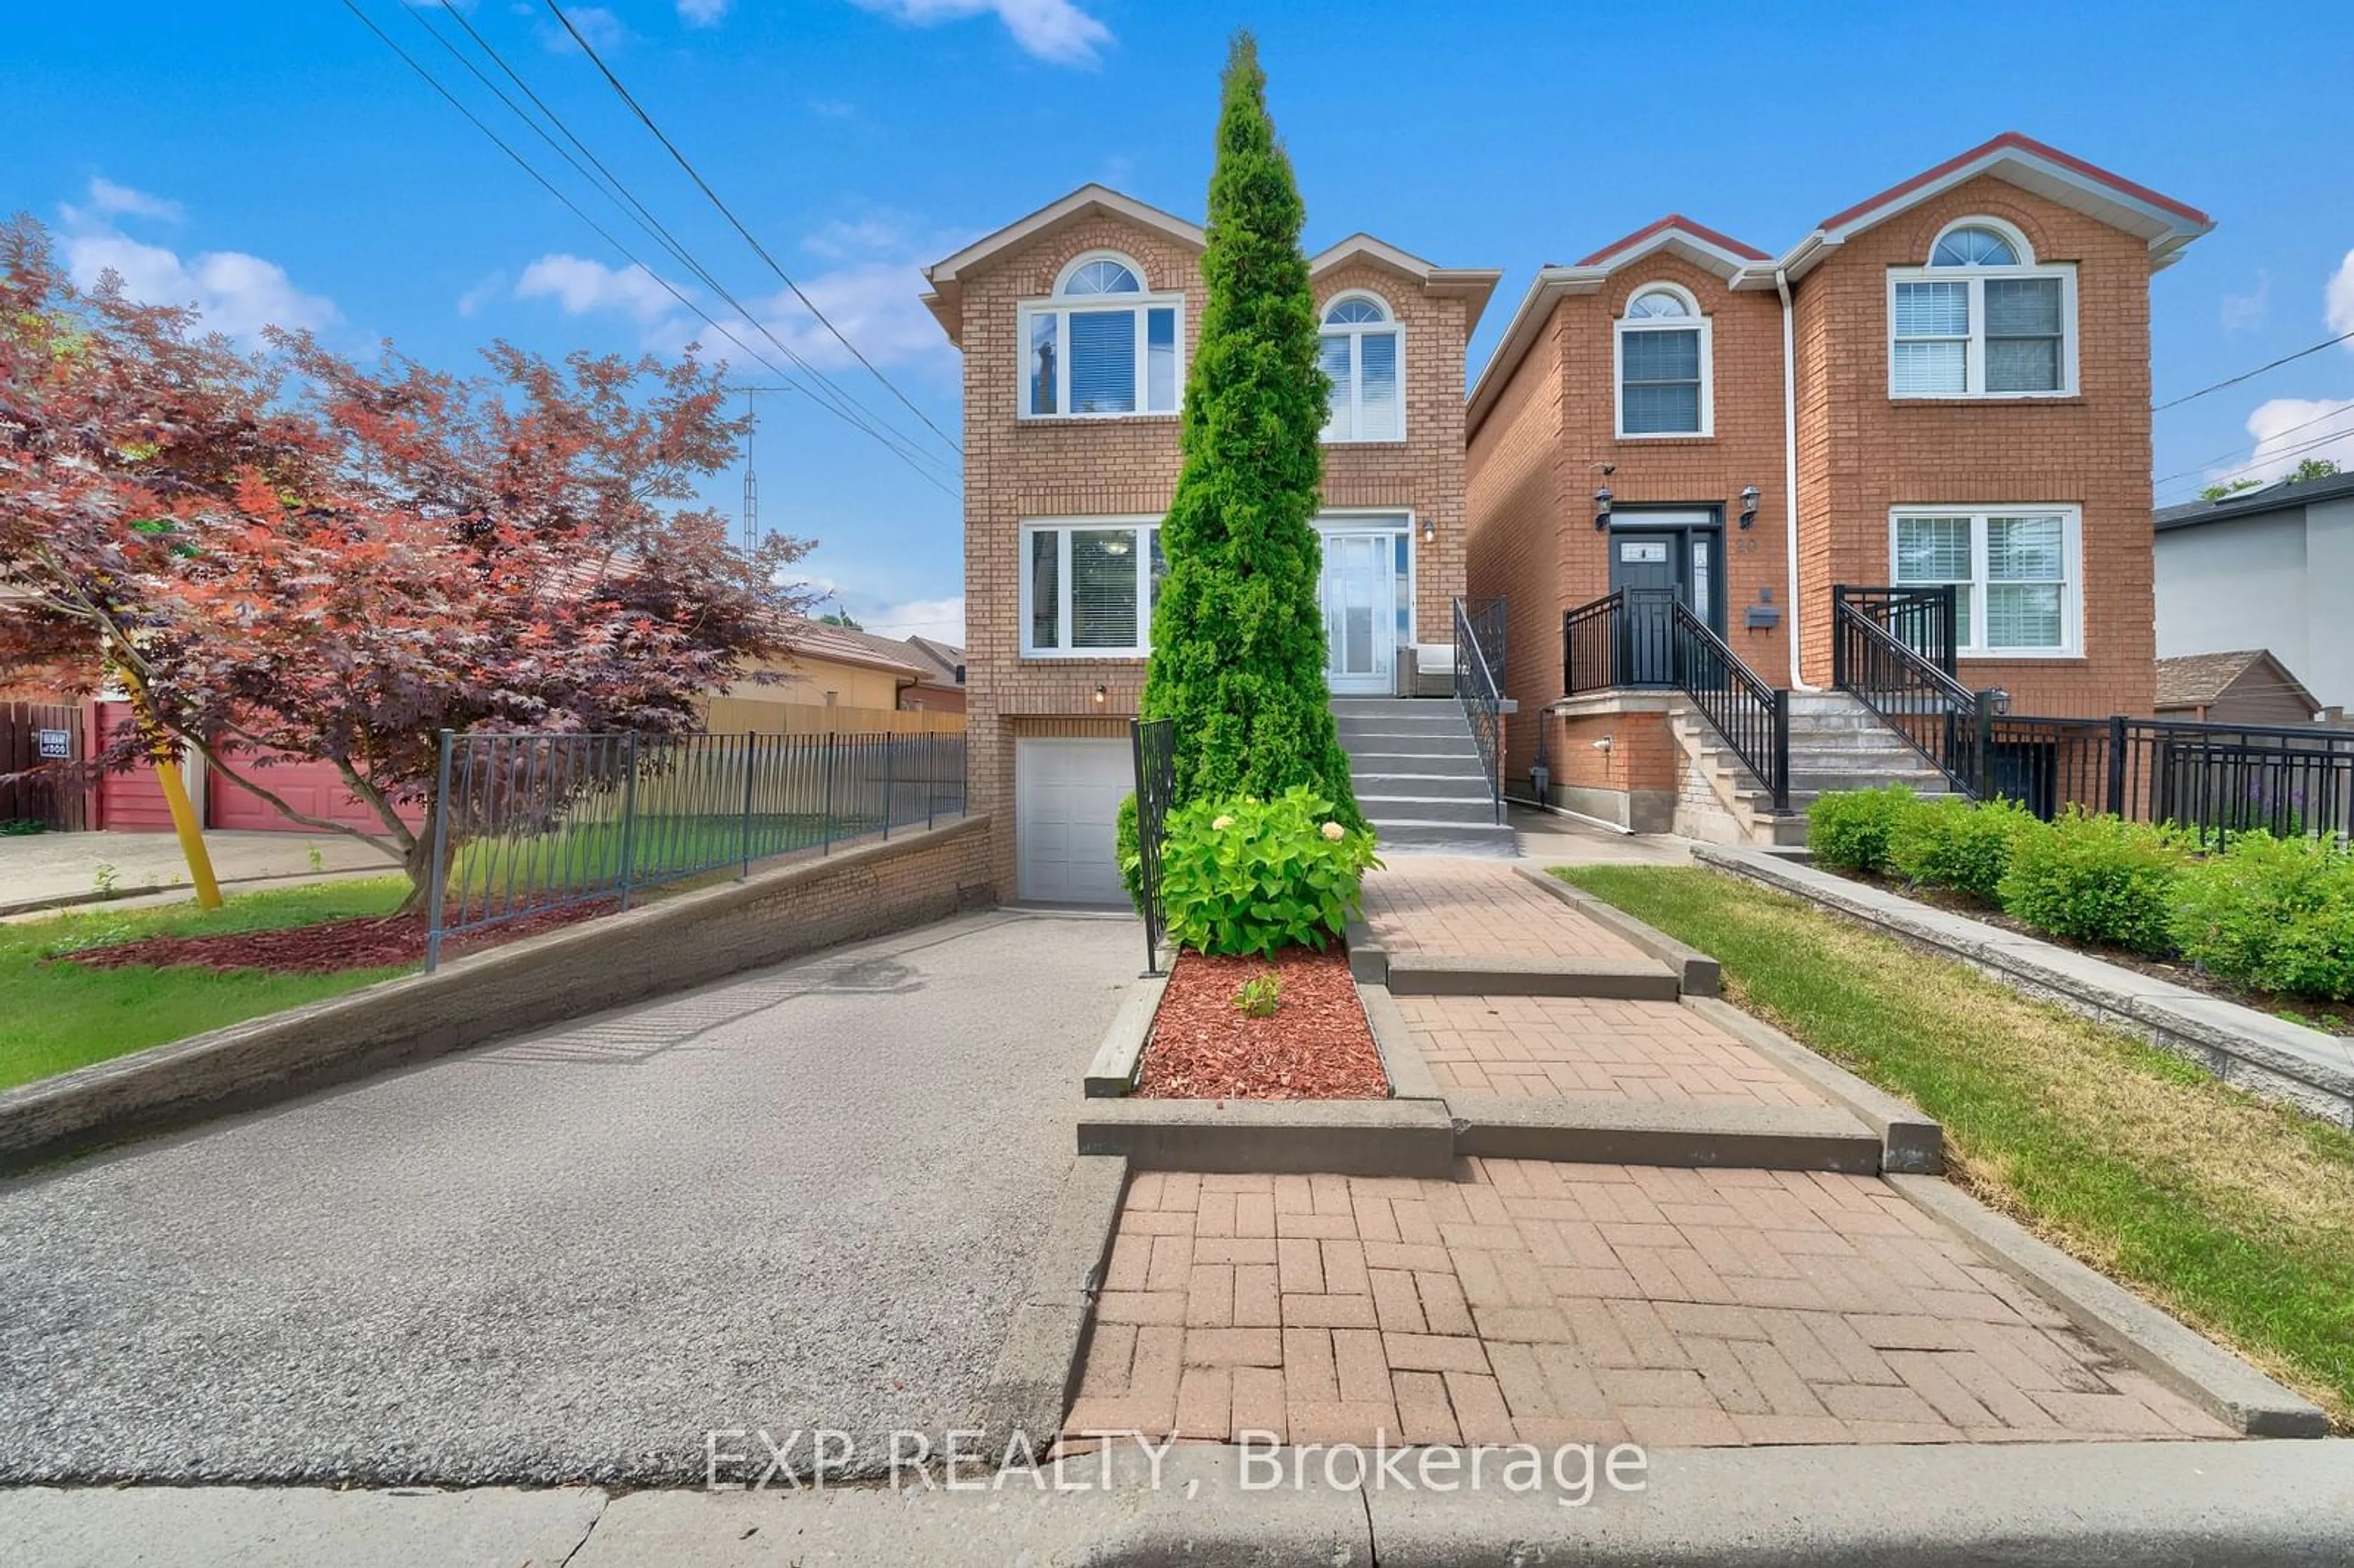 A pic from exterior of the house or condo for 18 Westlake Cres, Toronto Ontario M4C 2X2